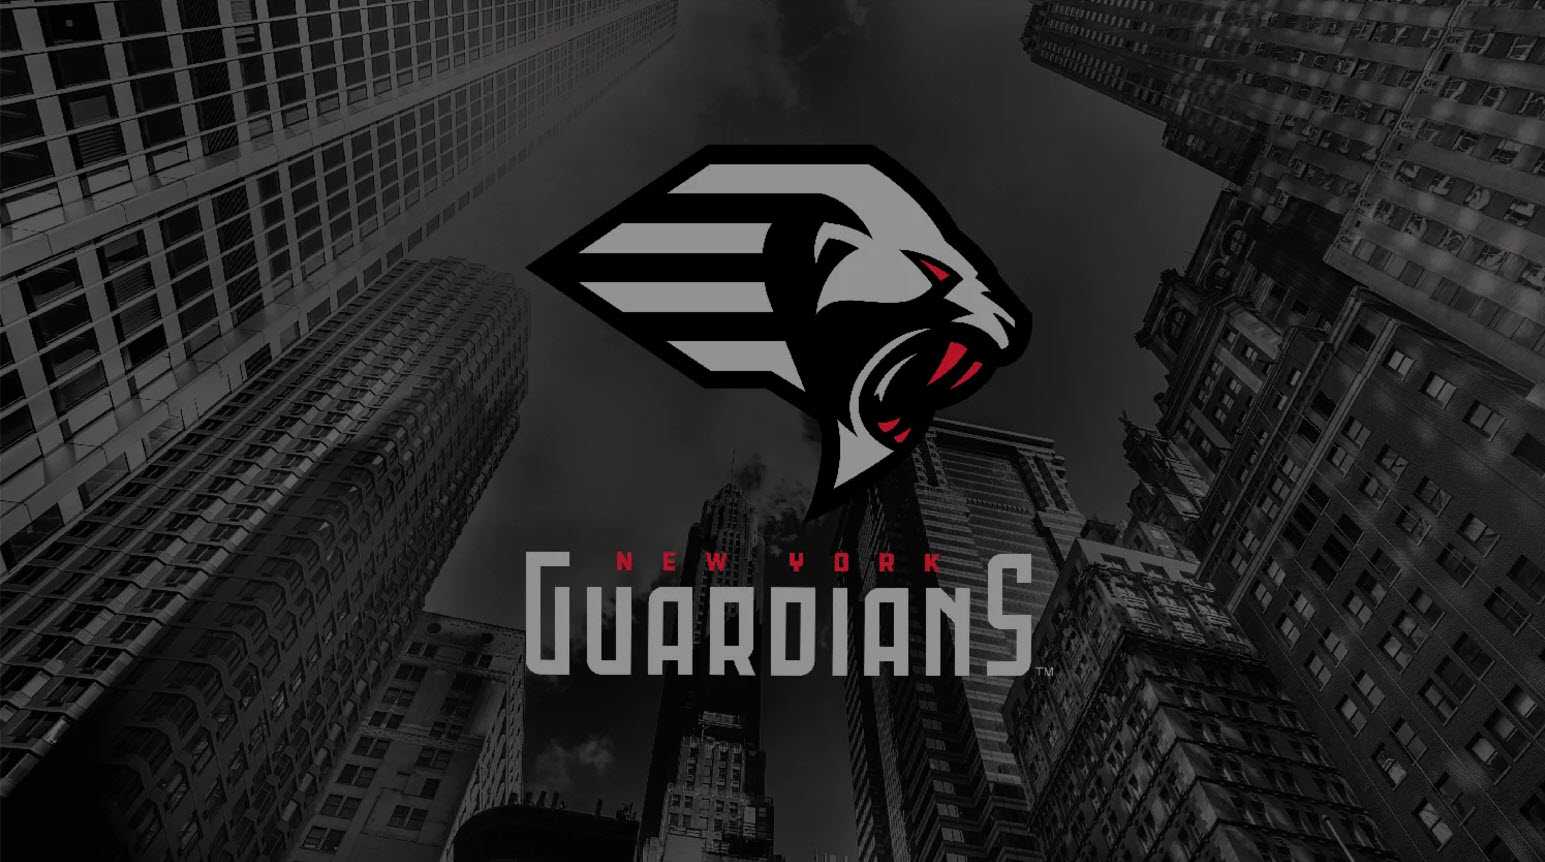  Reporting for Duty: Guardians at Defenders – XFL Week 2 Preview